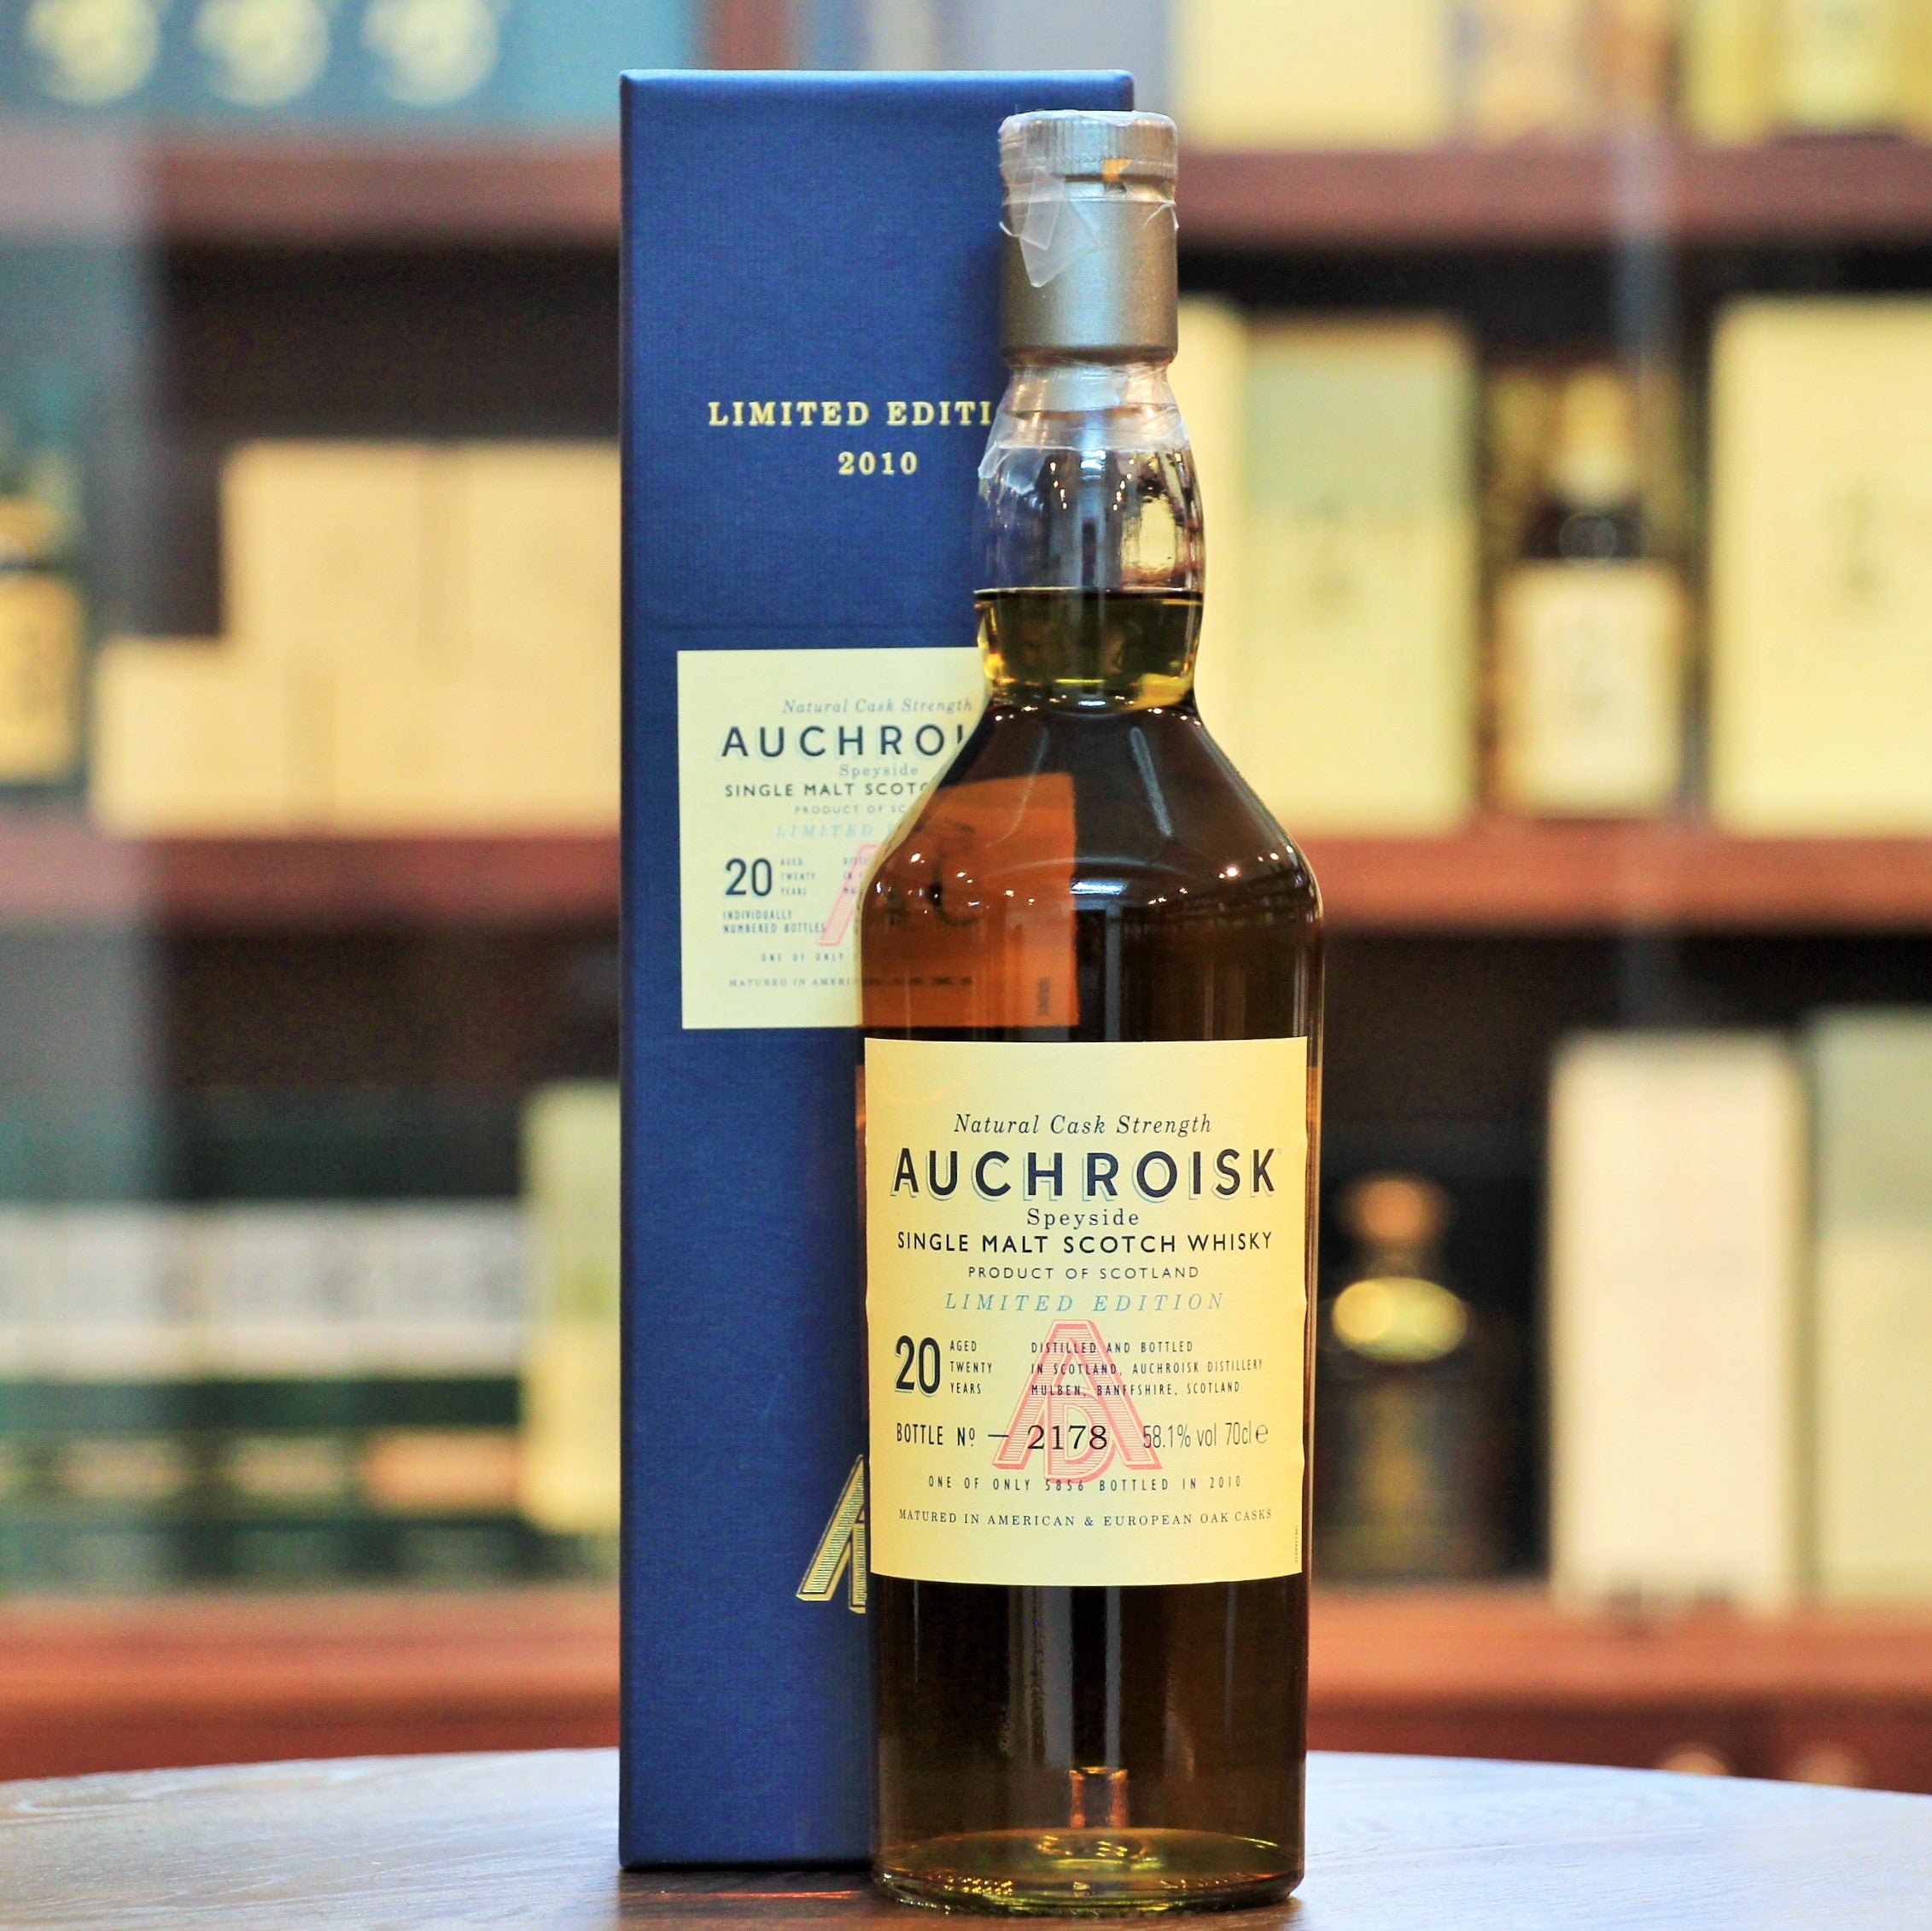 Auchroisk Limited Edition 20 Natural Cask Strength, American and European Oak matured and bottled in 2010 at Natural Cask Strength. A full bodied and rich single malt.